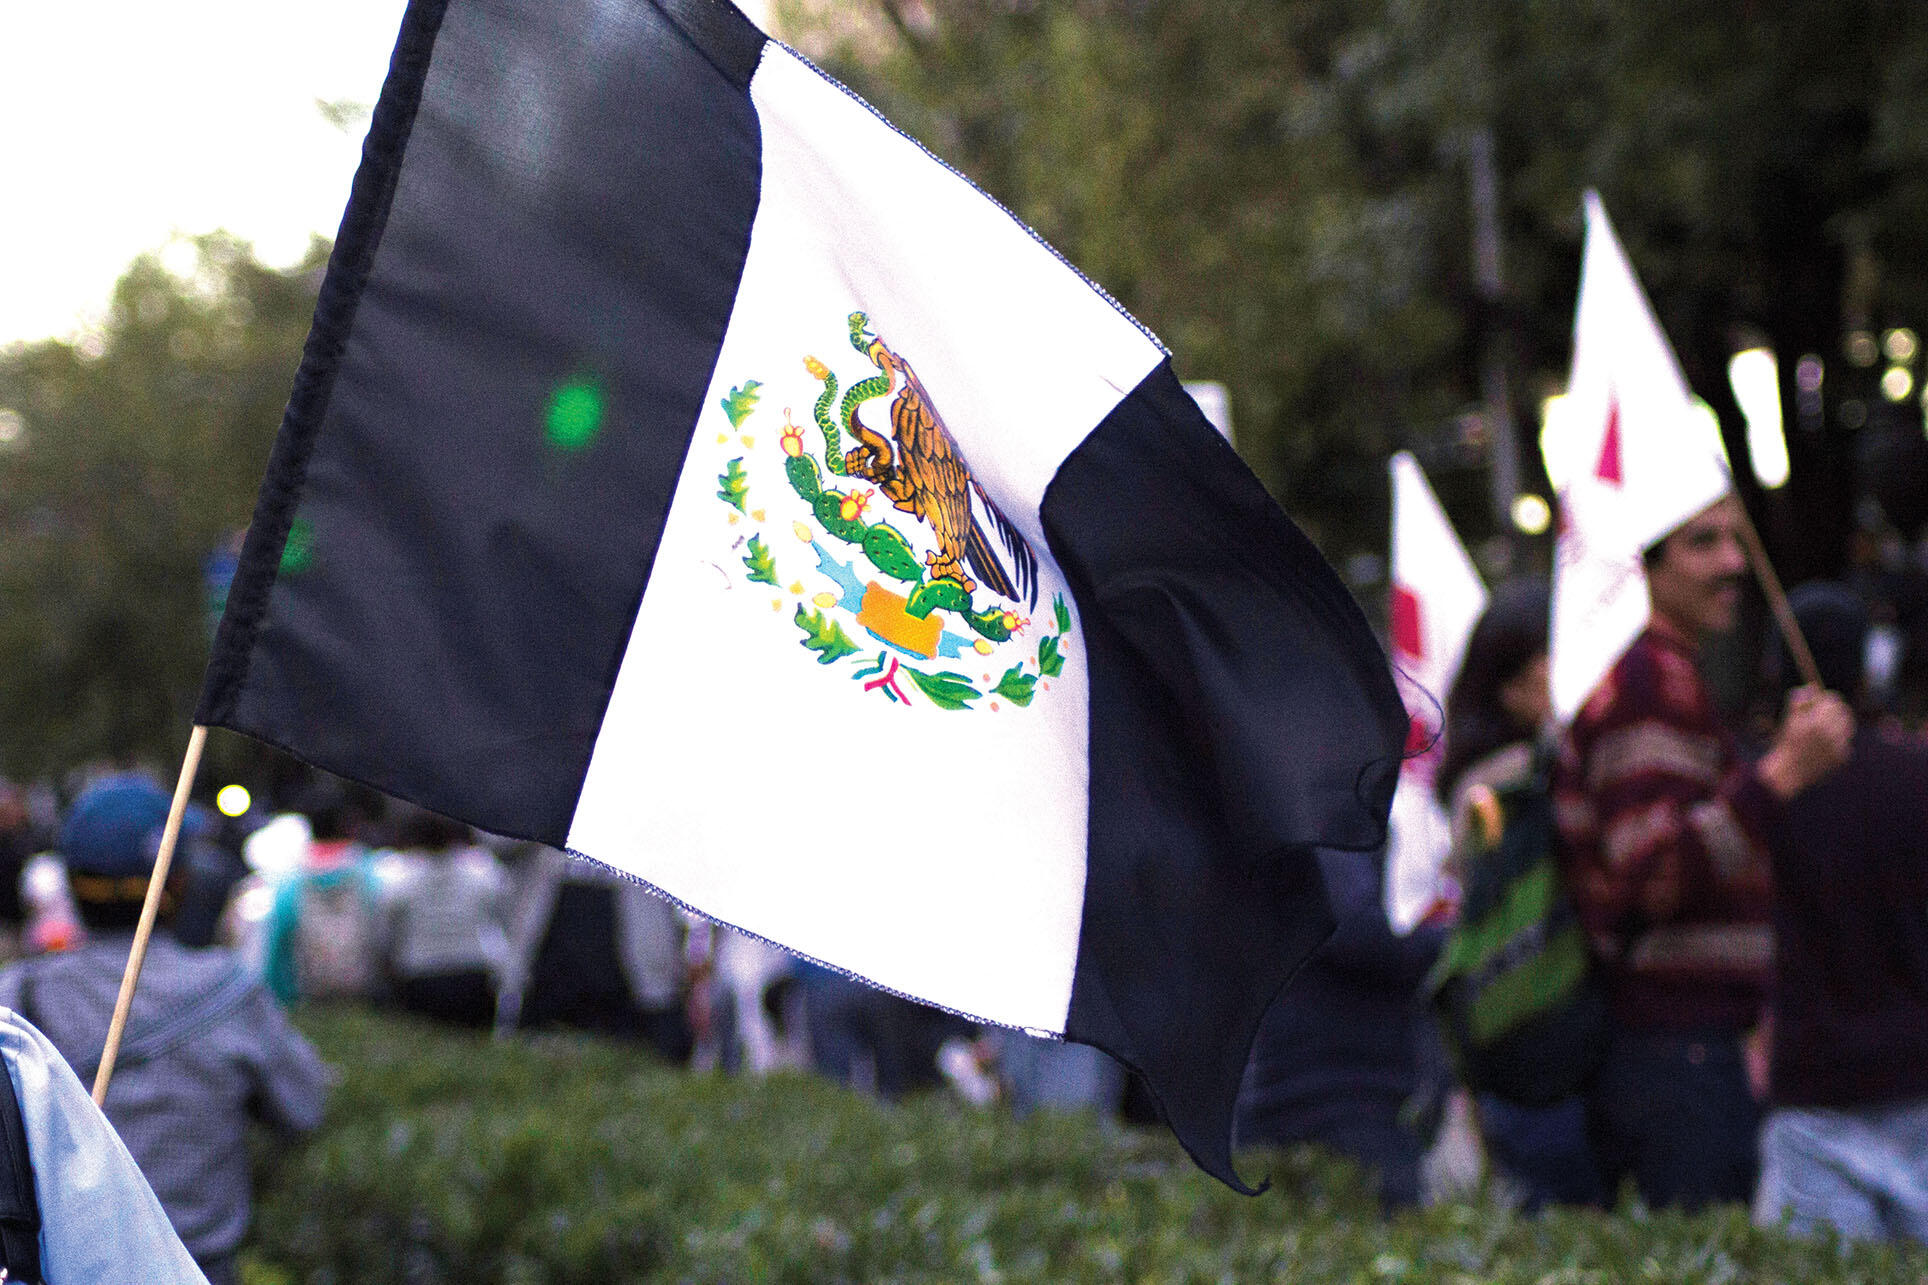 Black stripes replace red and green in this modified Mexican flag flown at a protest. (Photo by Apollo Gonzales.)